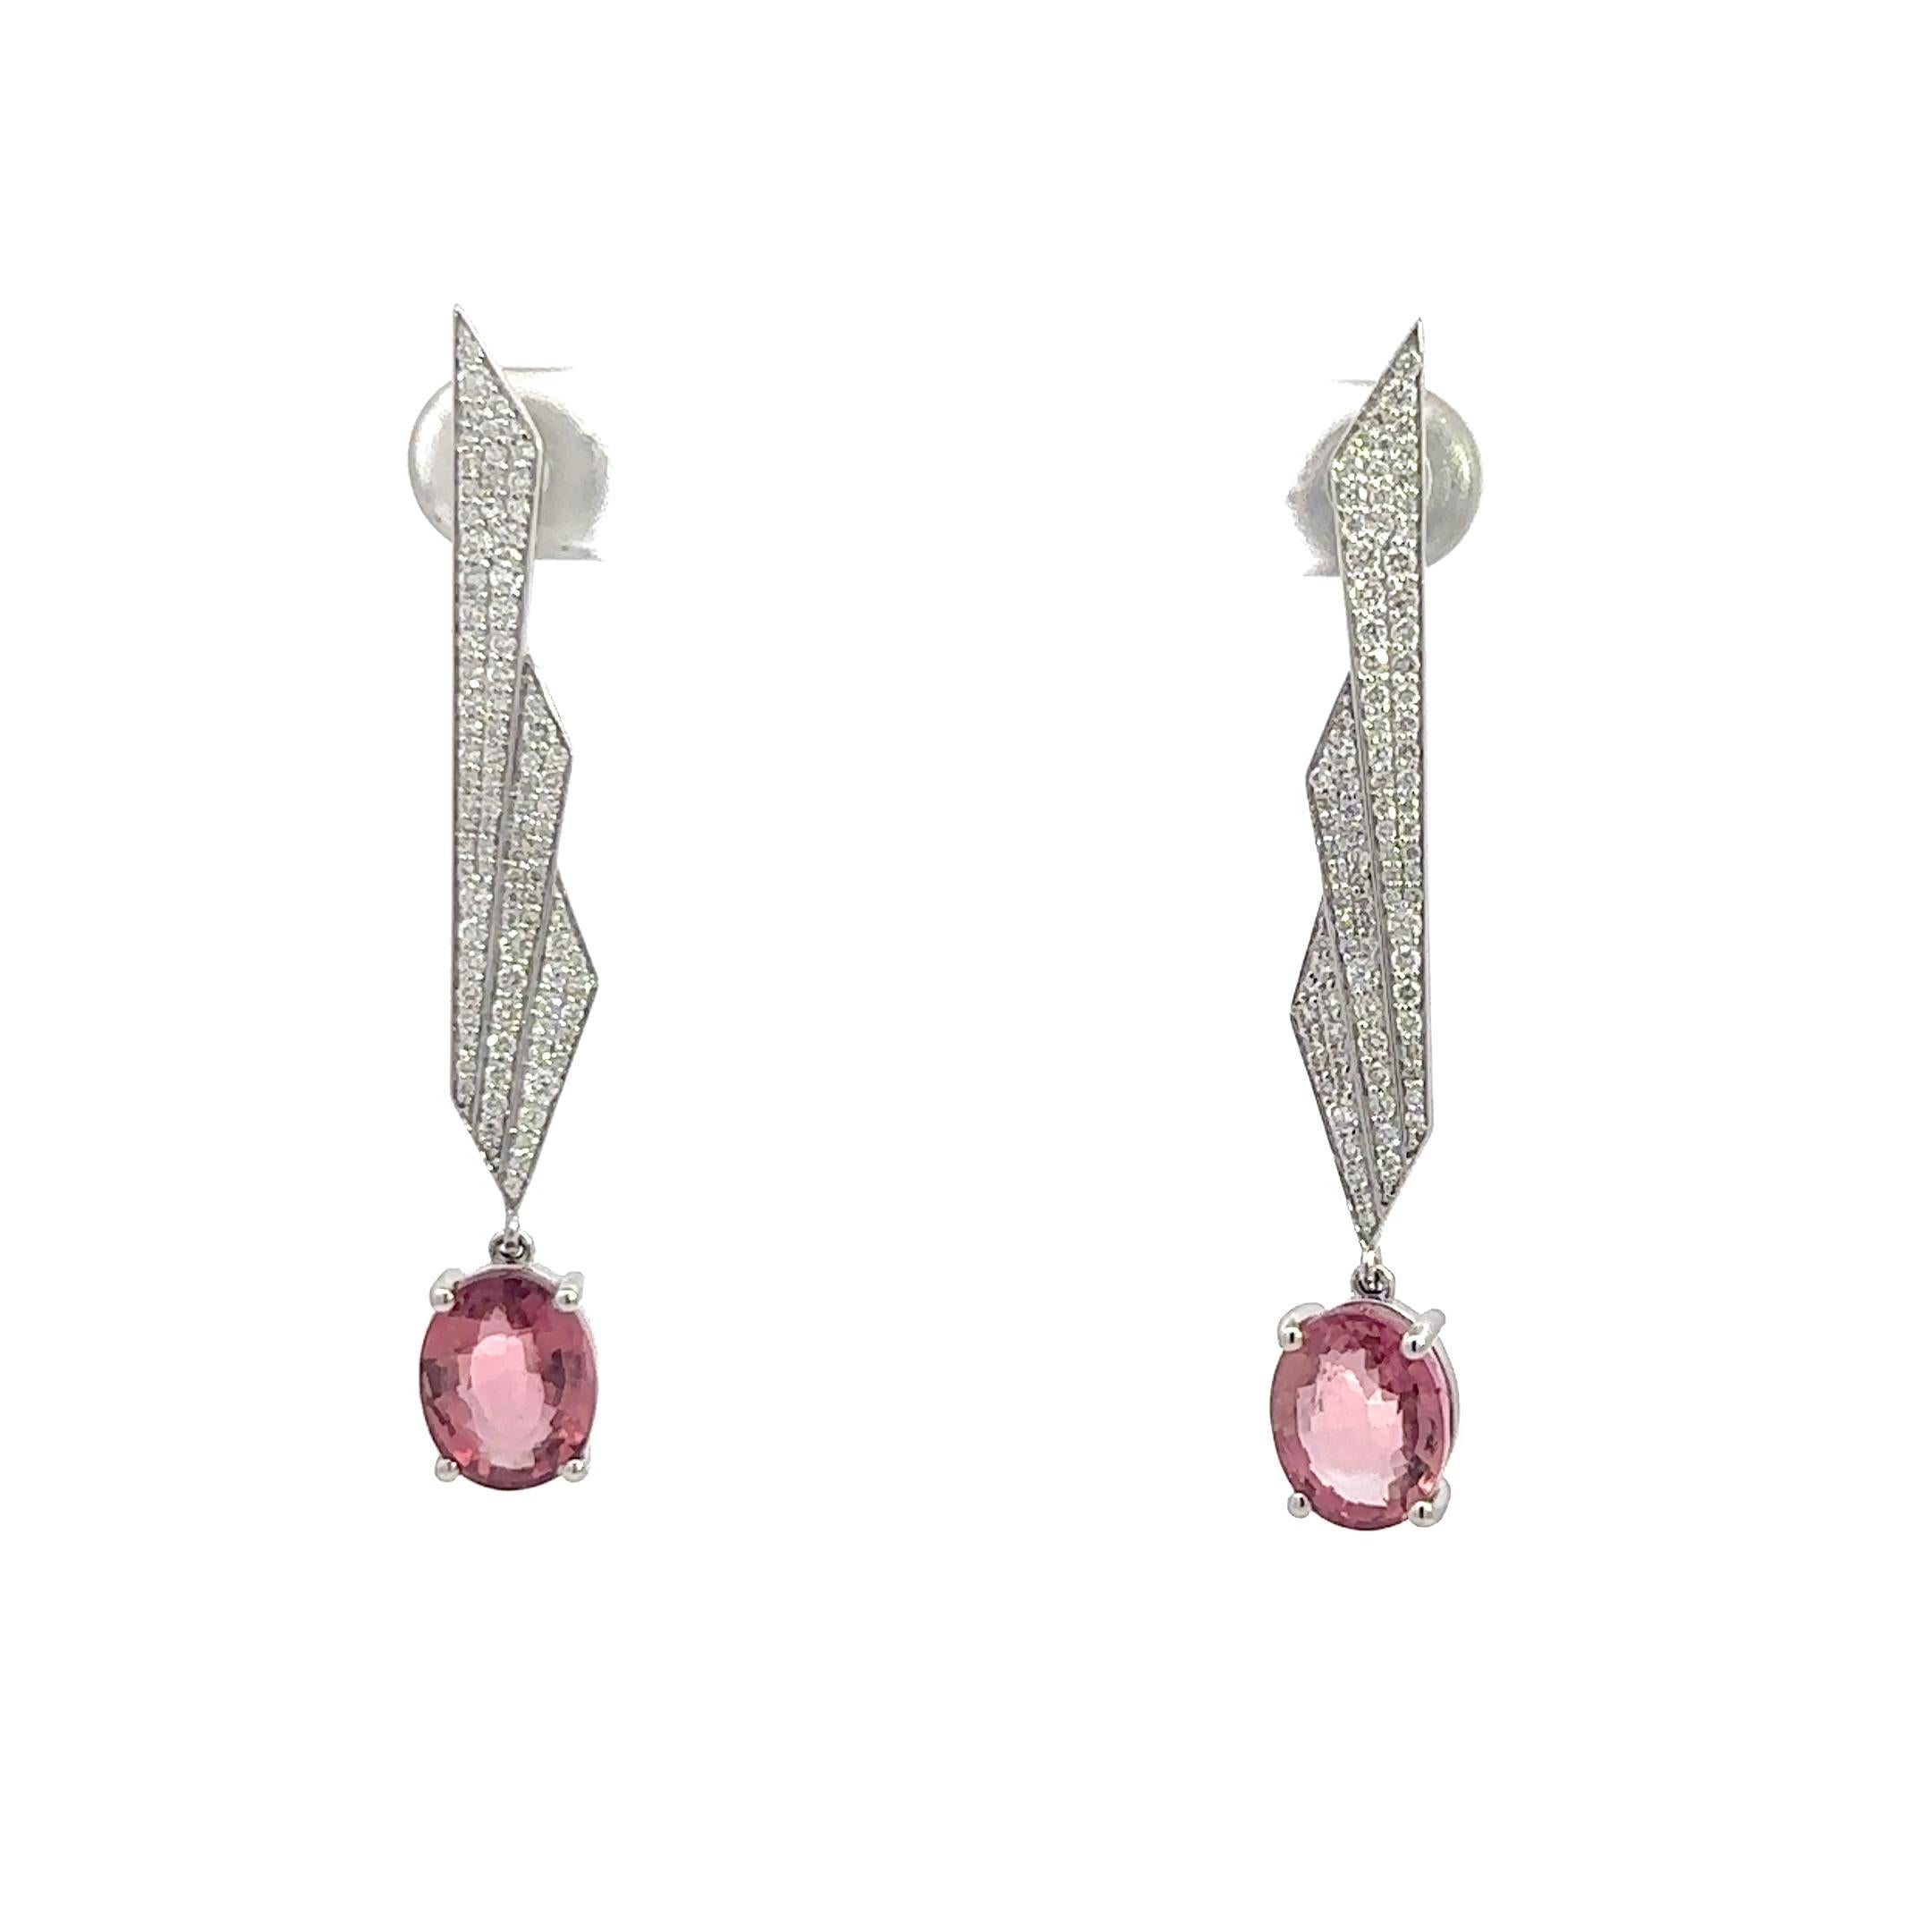 Round Cut Rare Pink Tourmaline Diamond 18K White Gold Exclusive Earrings For Sale